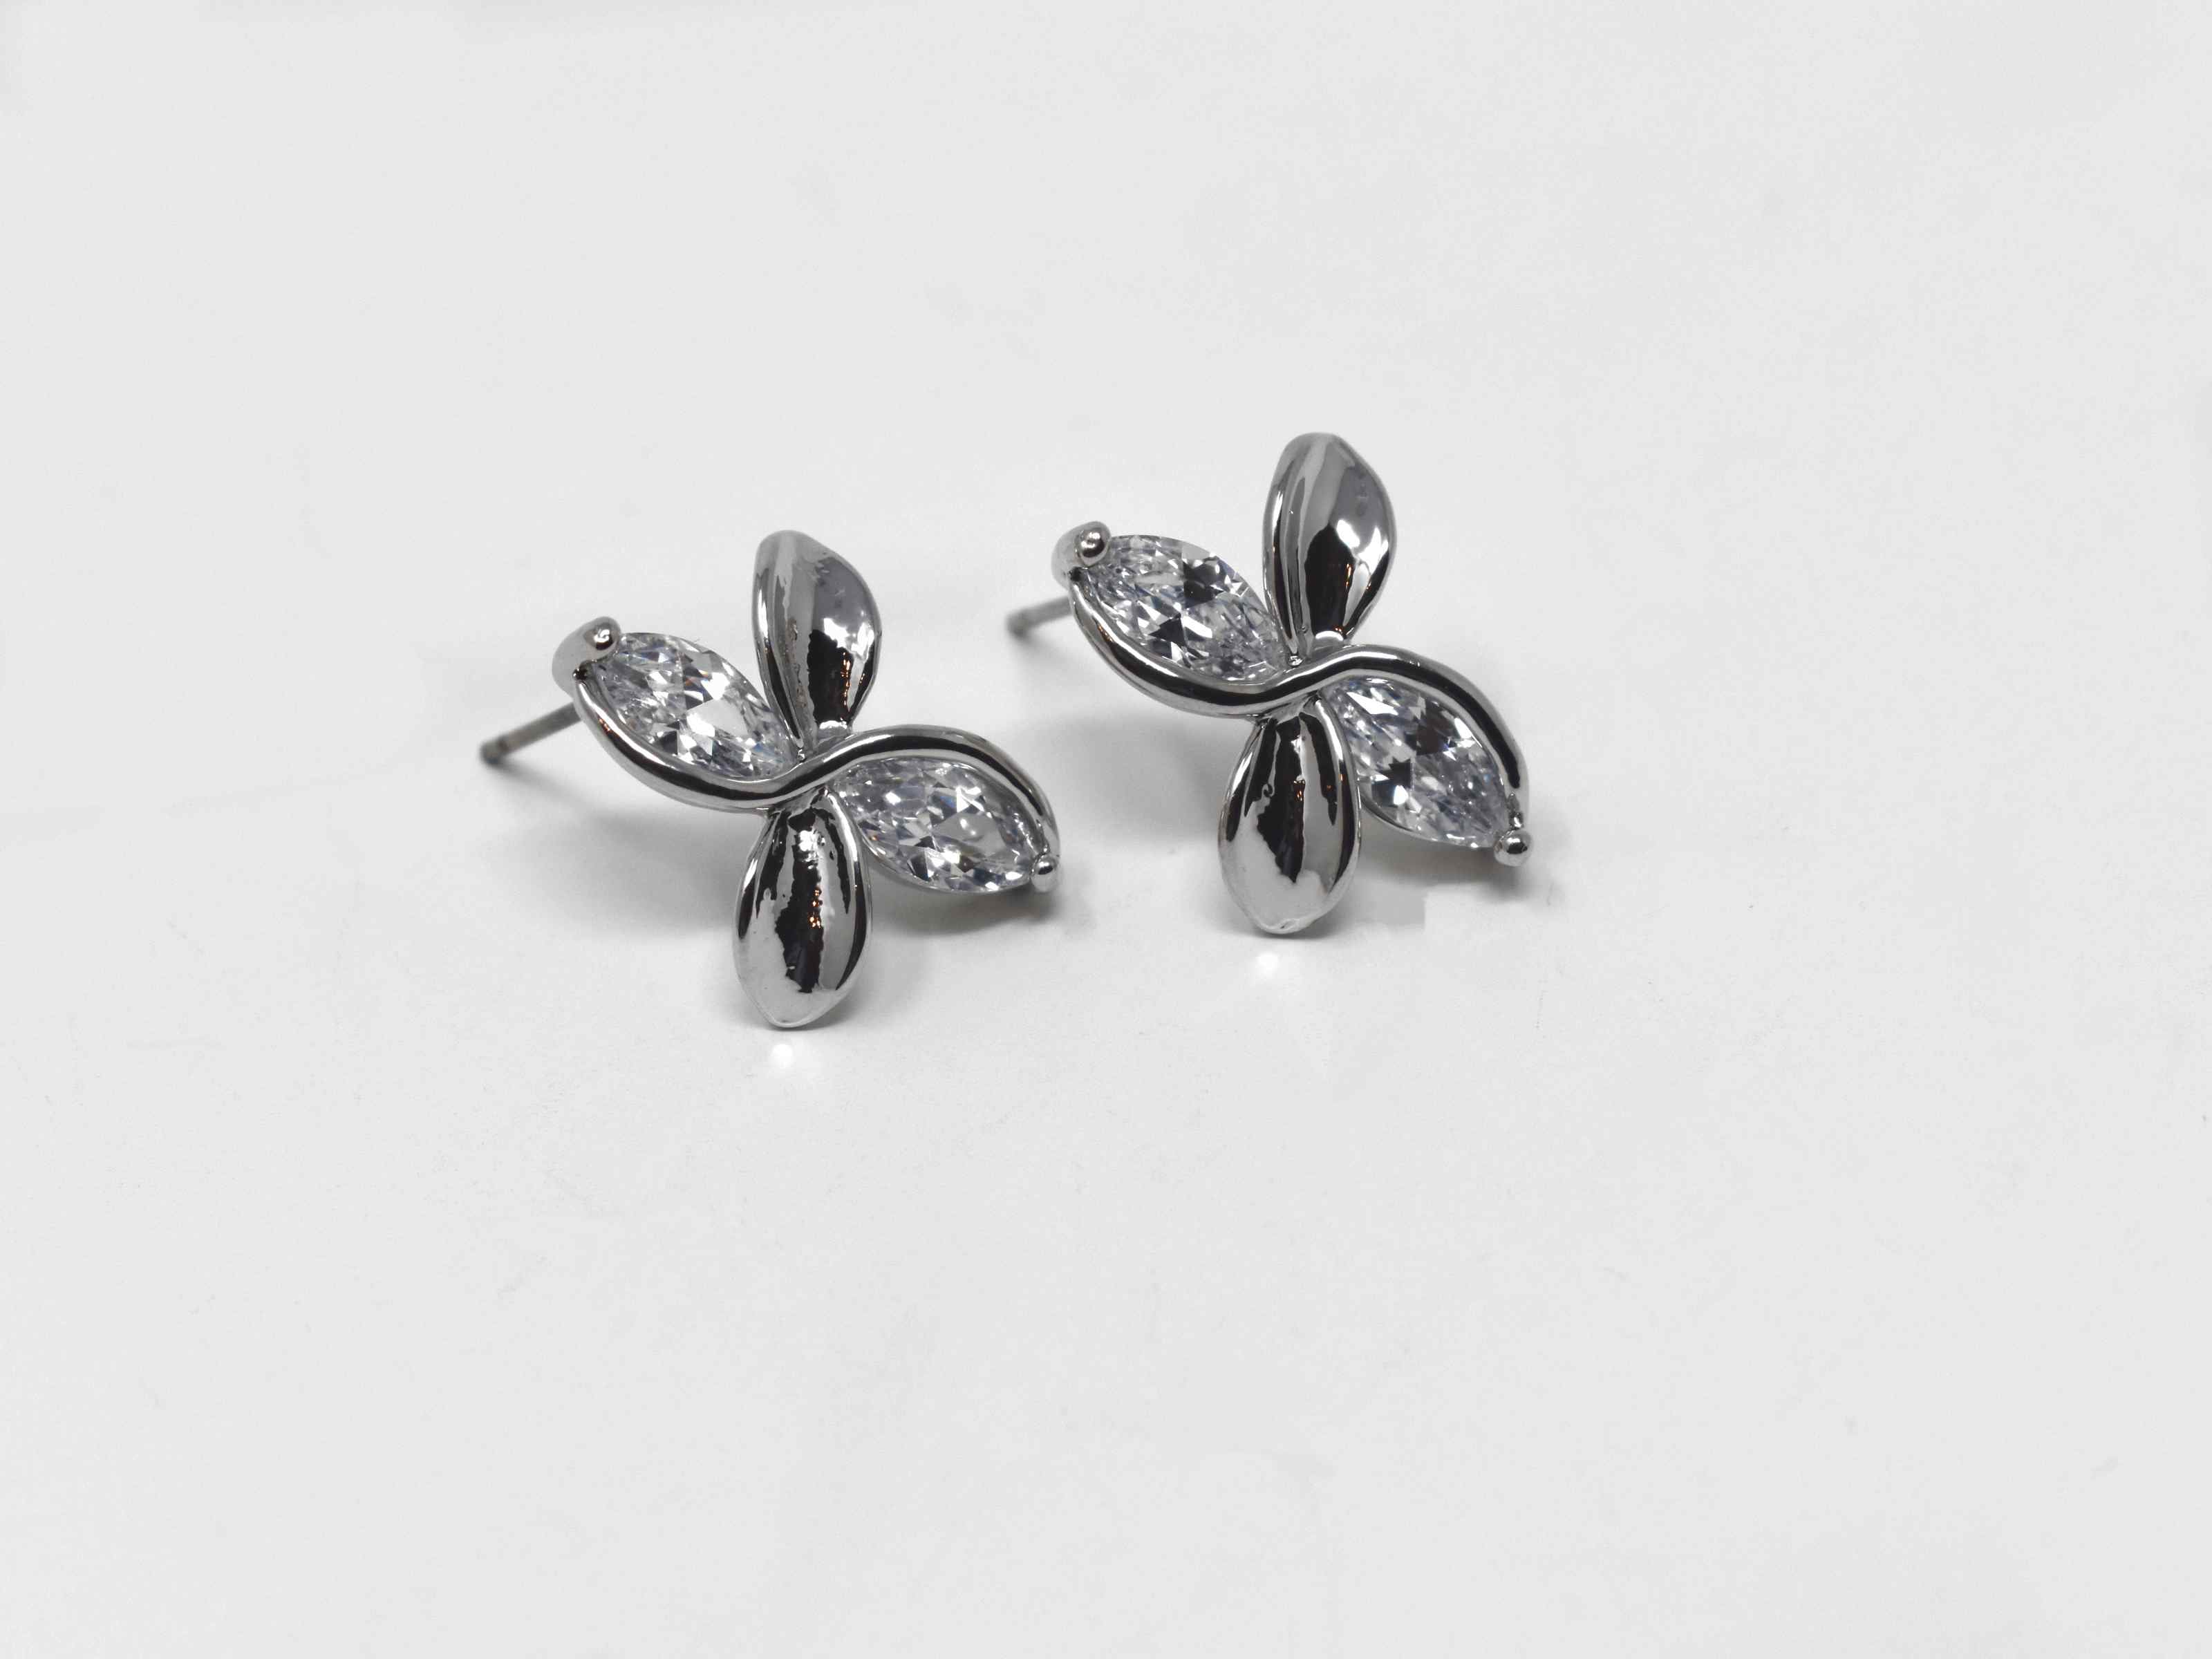 Our delicate and chic frangipani earrings are so versatile to help walk you through your style journey. They are a silver tone knob earrings with silver stones and a  push back clasp.